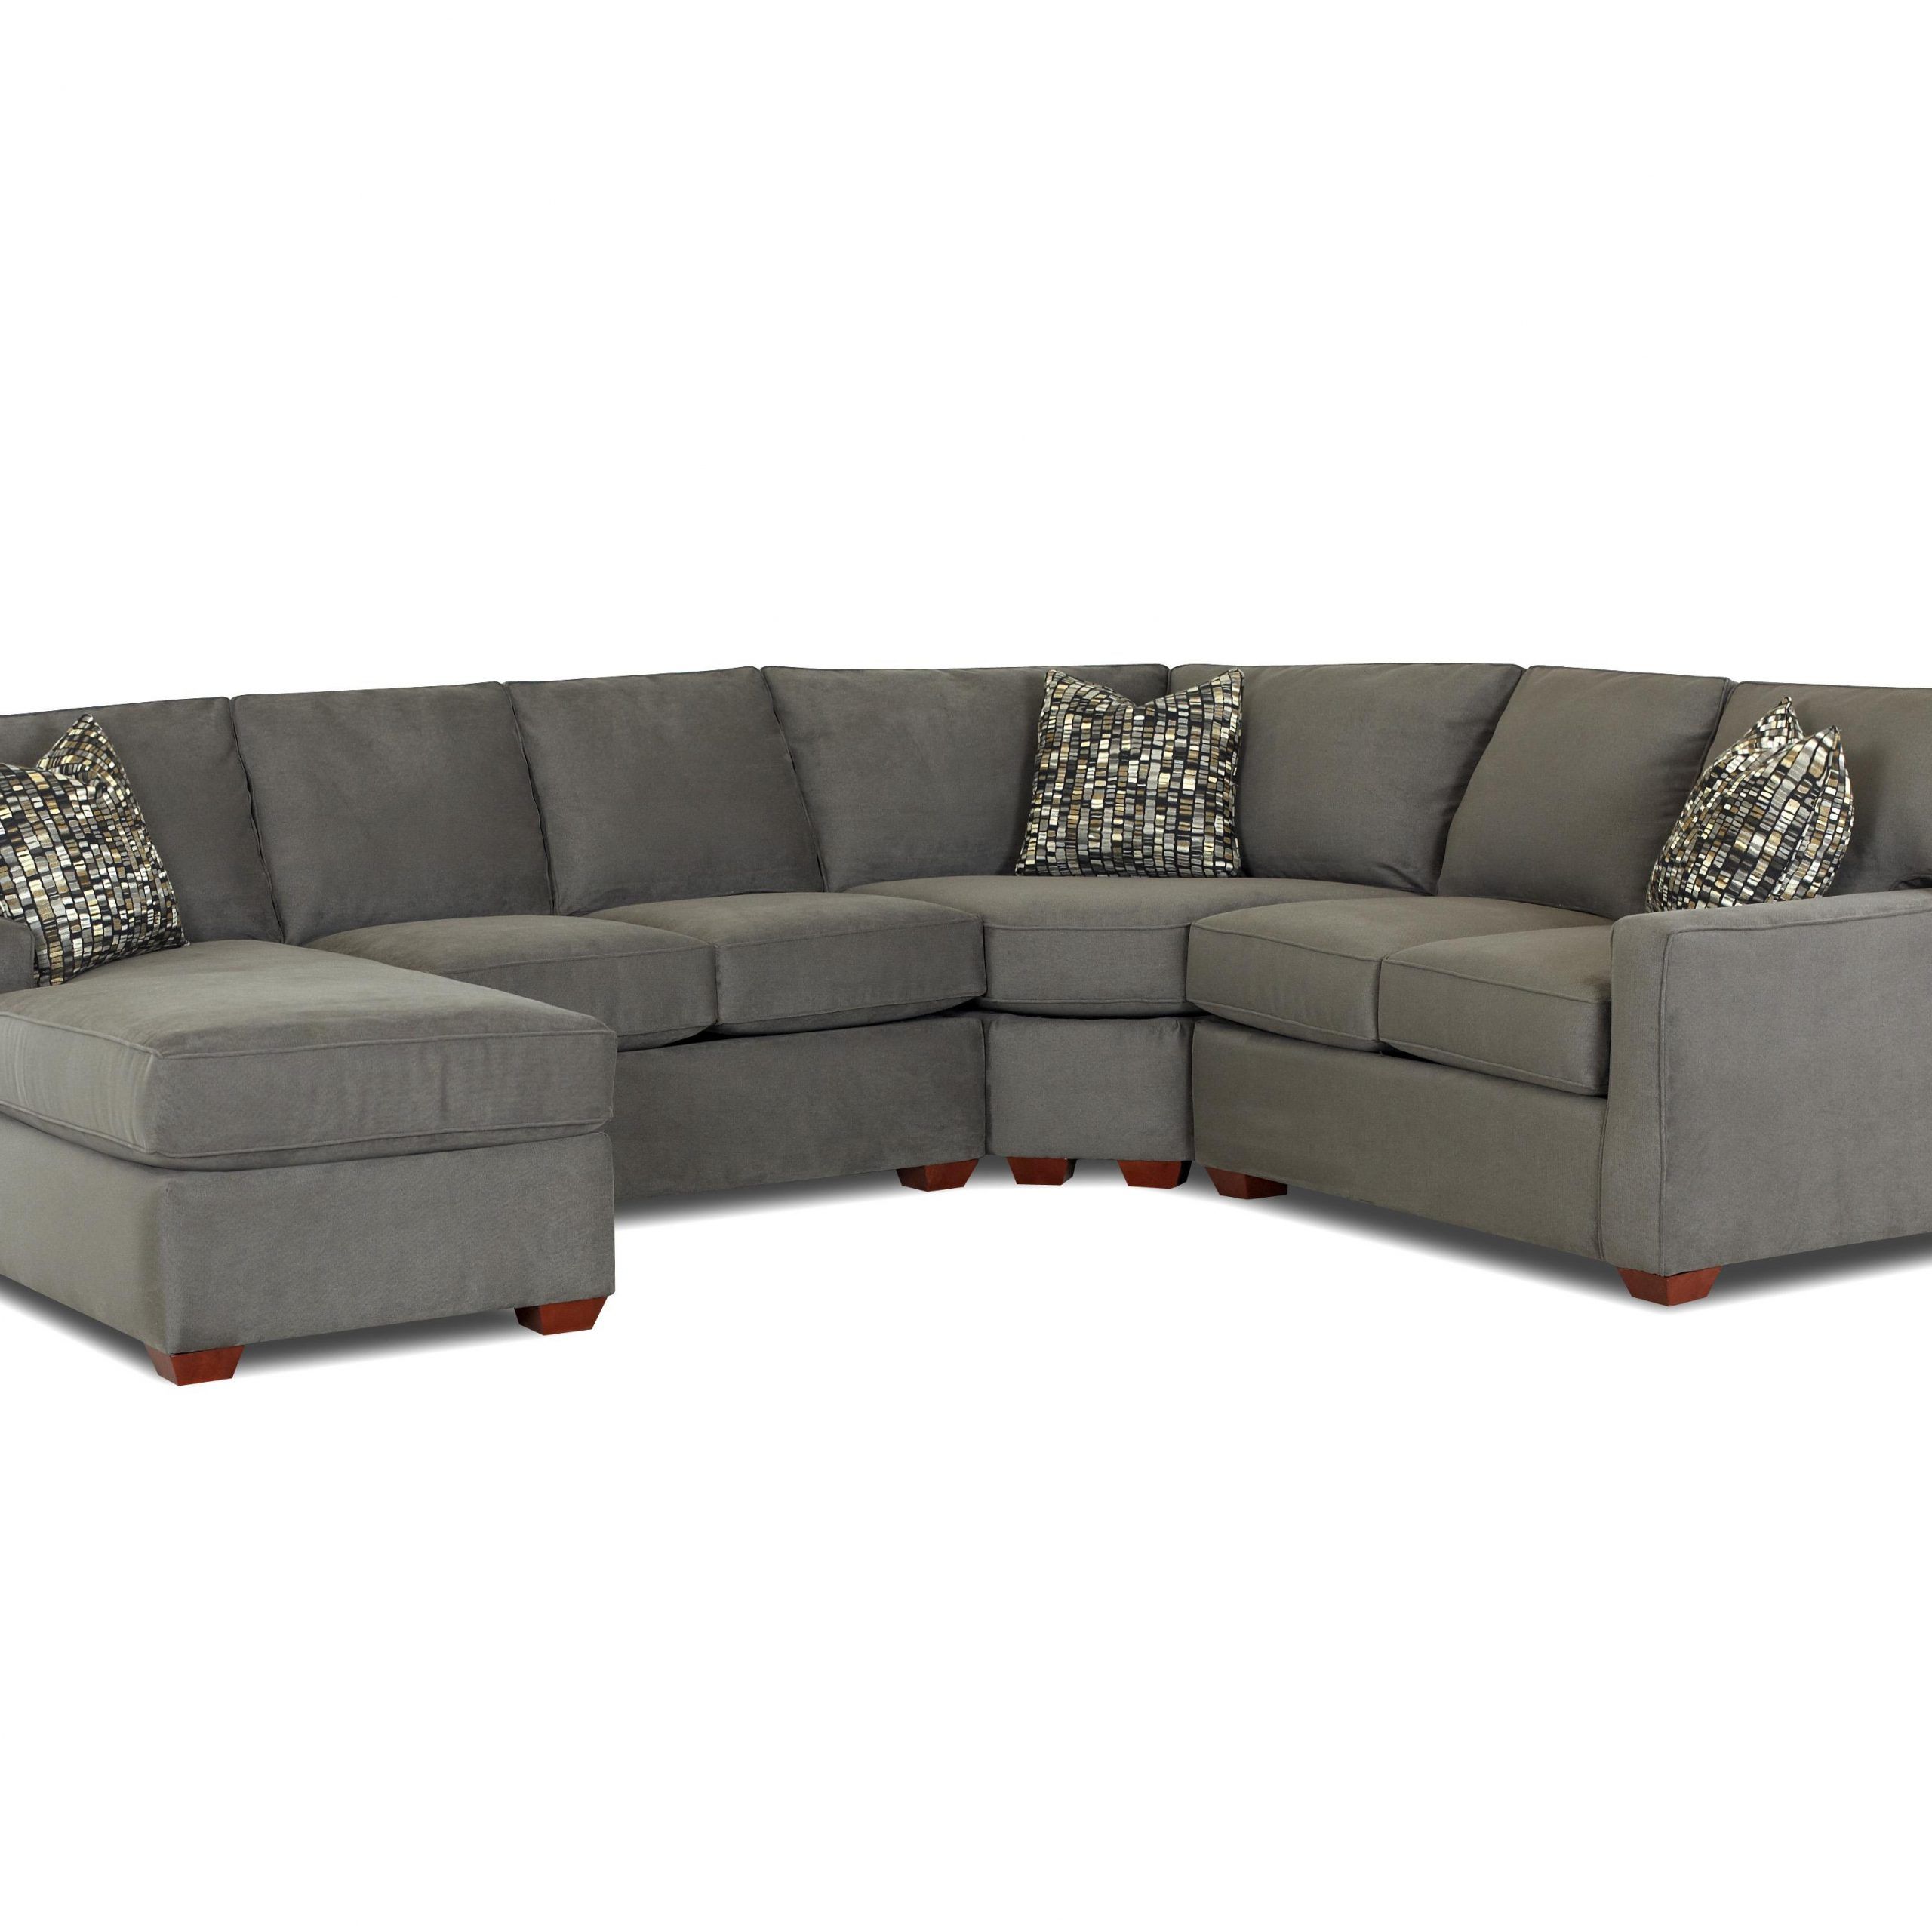 Contemporary L Shaped Sectional Sofa With Left Arm Facing Within Hannah Left Sectional Sofas (View 15 of 15)